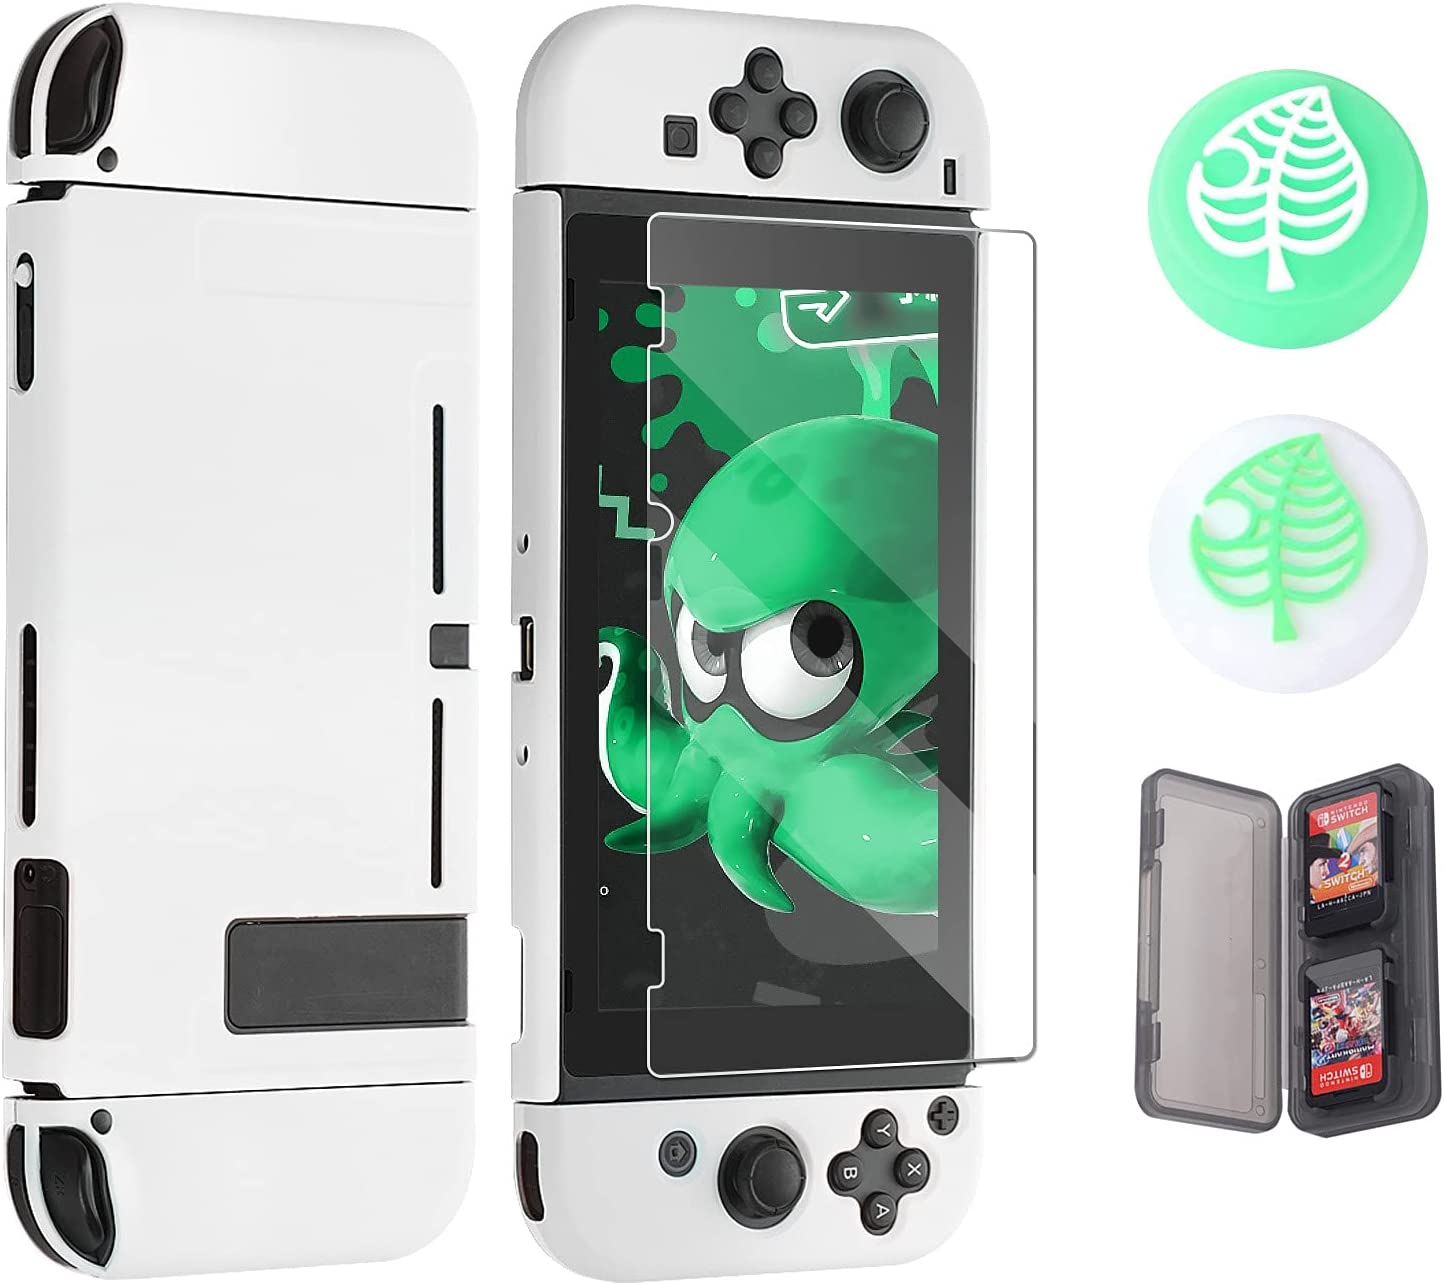 Taovaonl Switch Case (White)